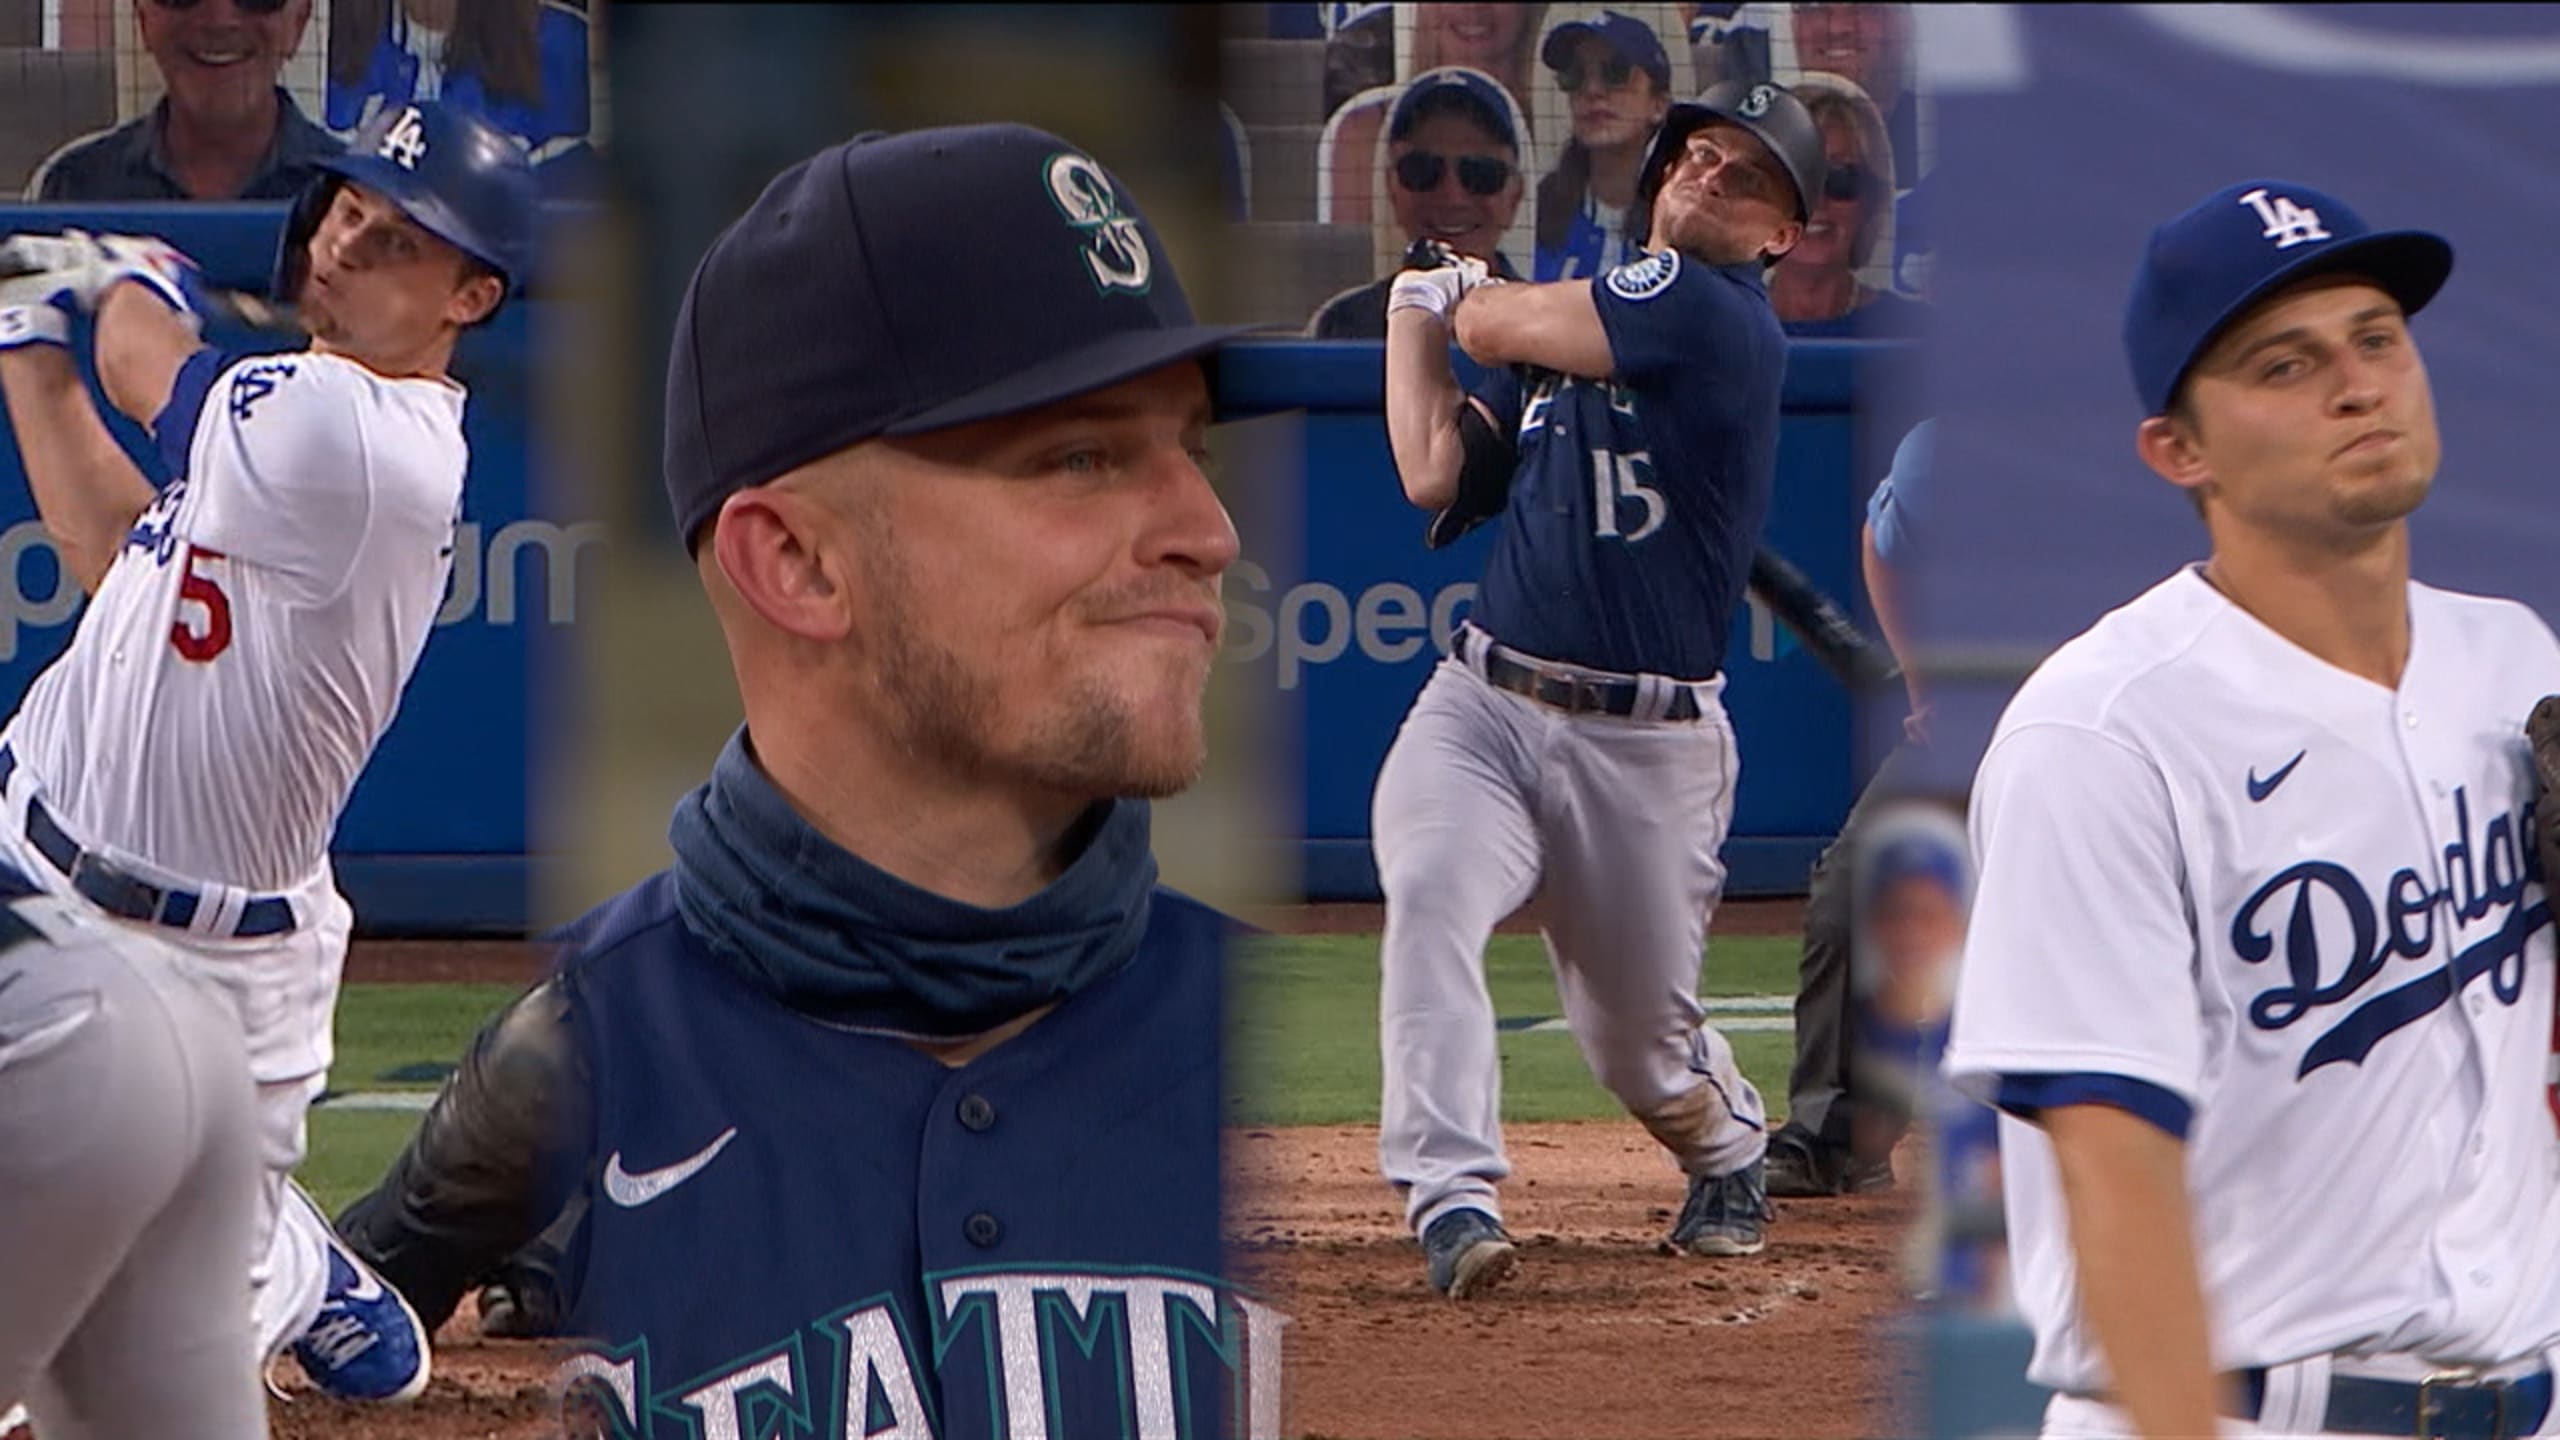 Old school Kyle Seager, brothers making baseball the family business